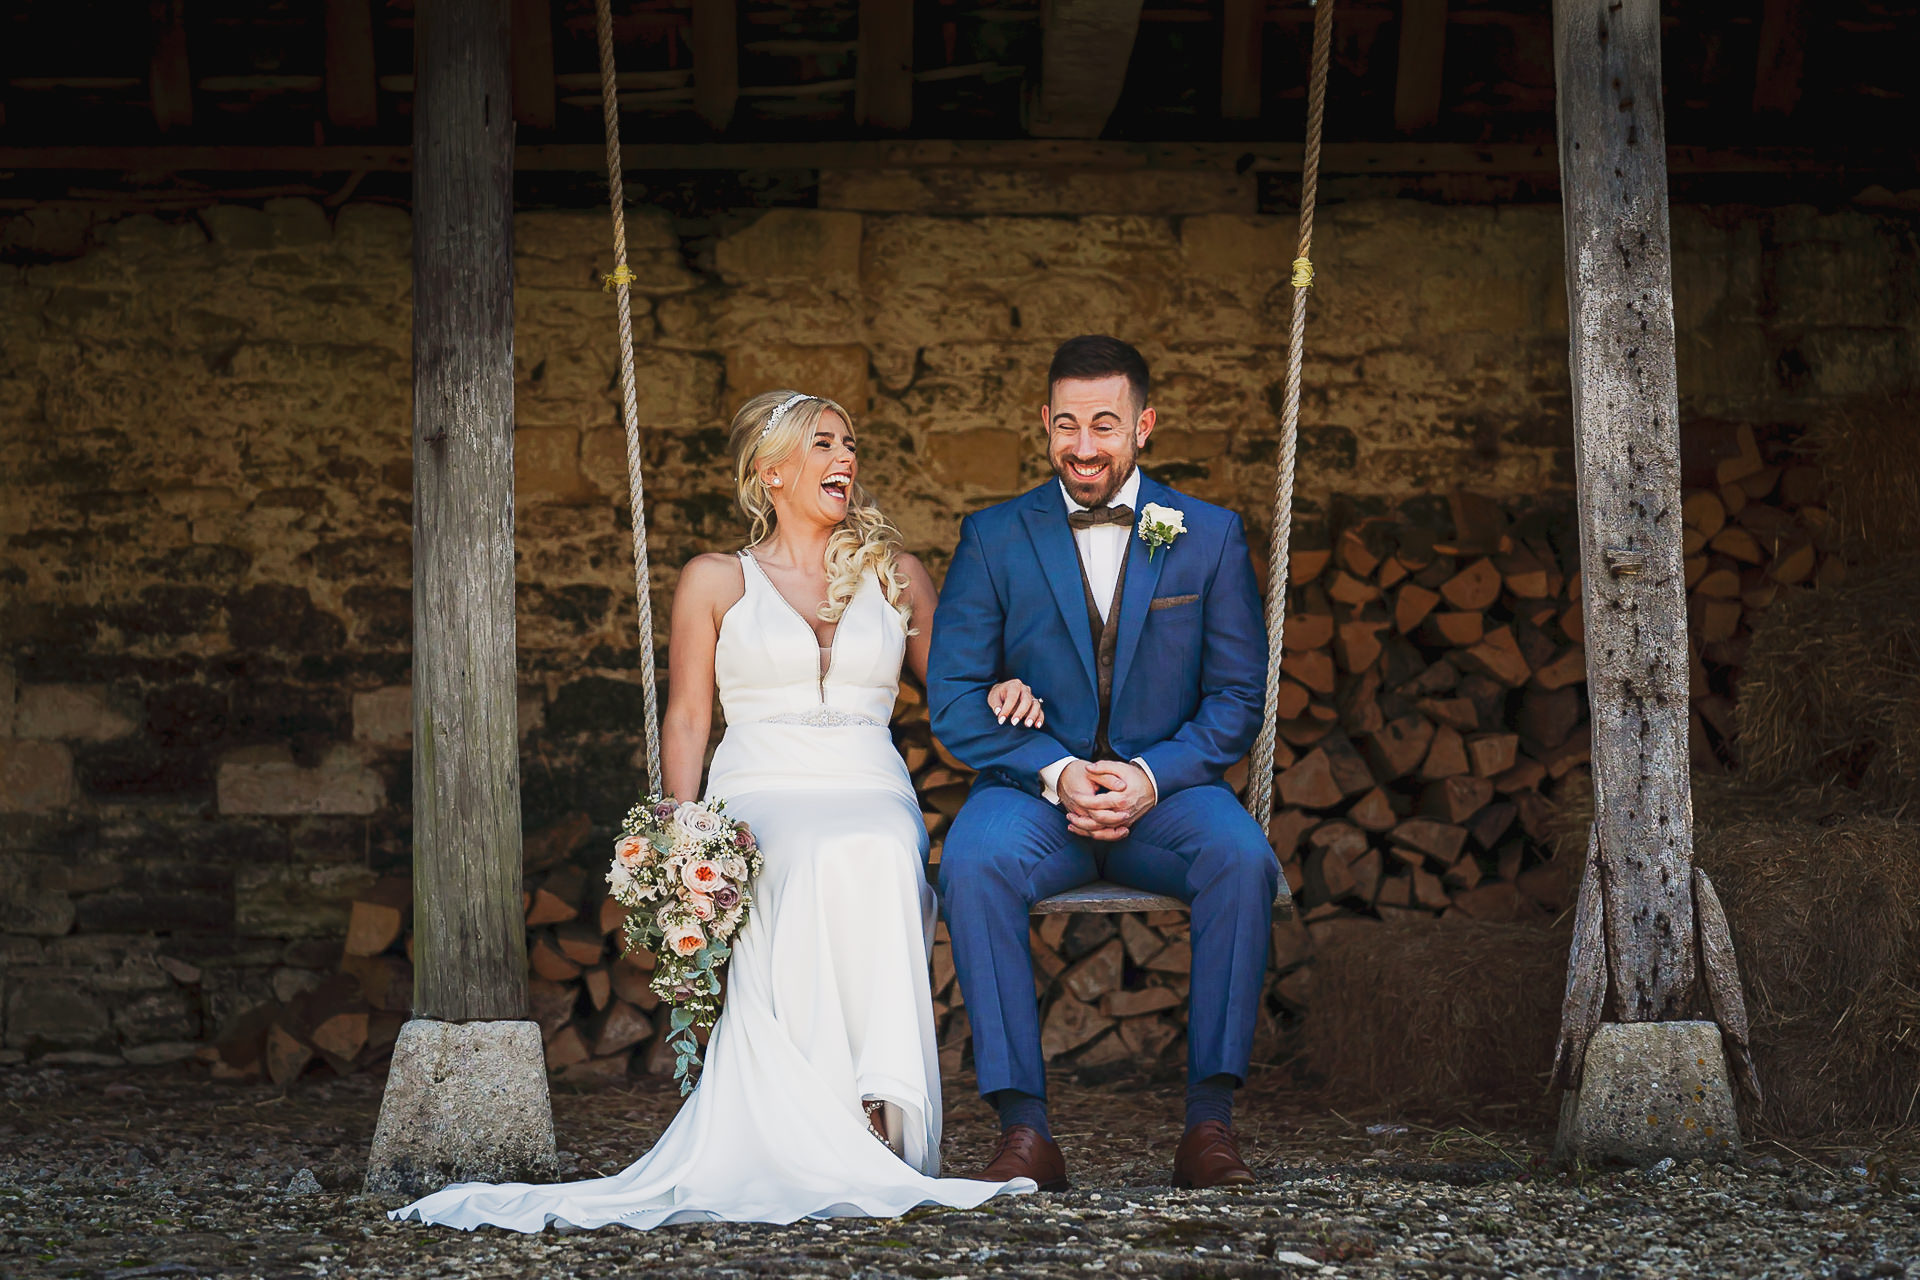 Bristol wedding photographer captures the love between a bride and groom sitting on a swing in a barn.